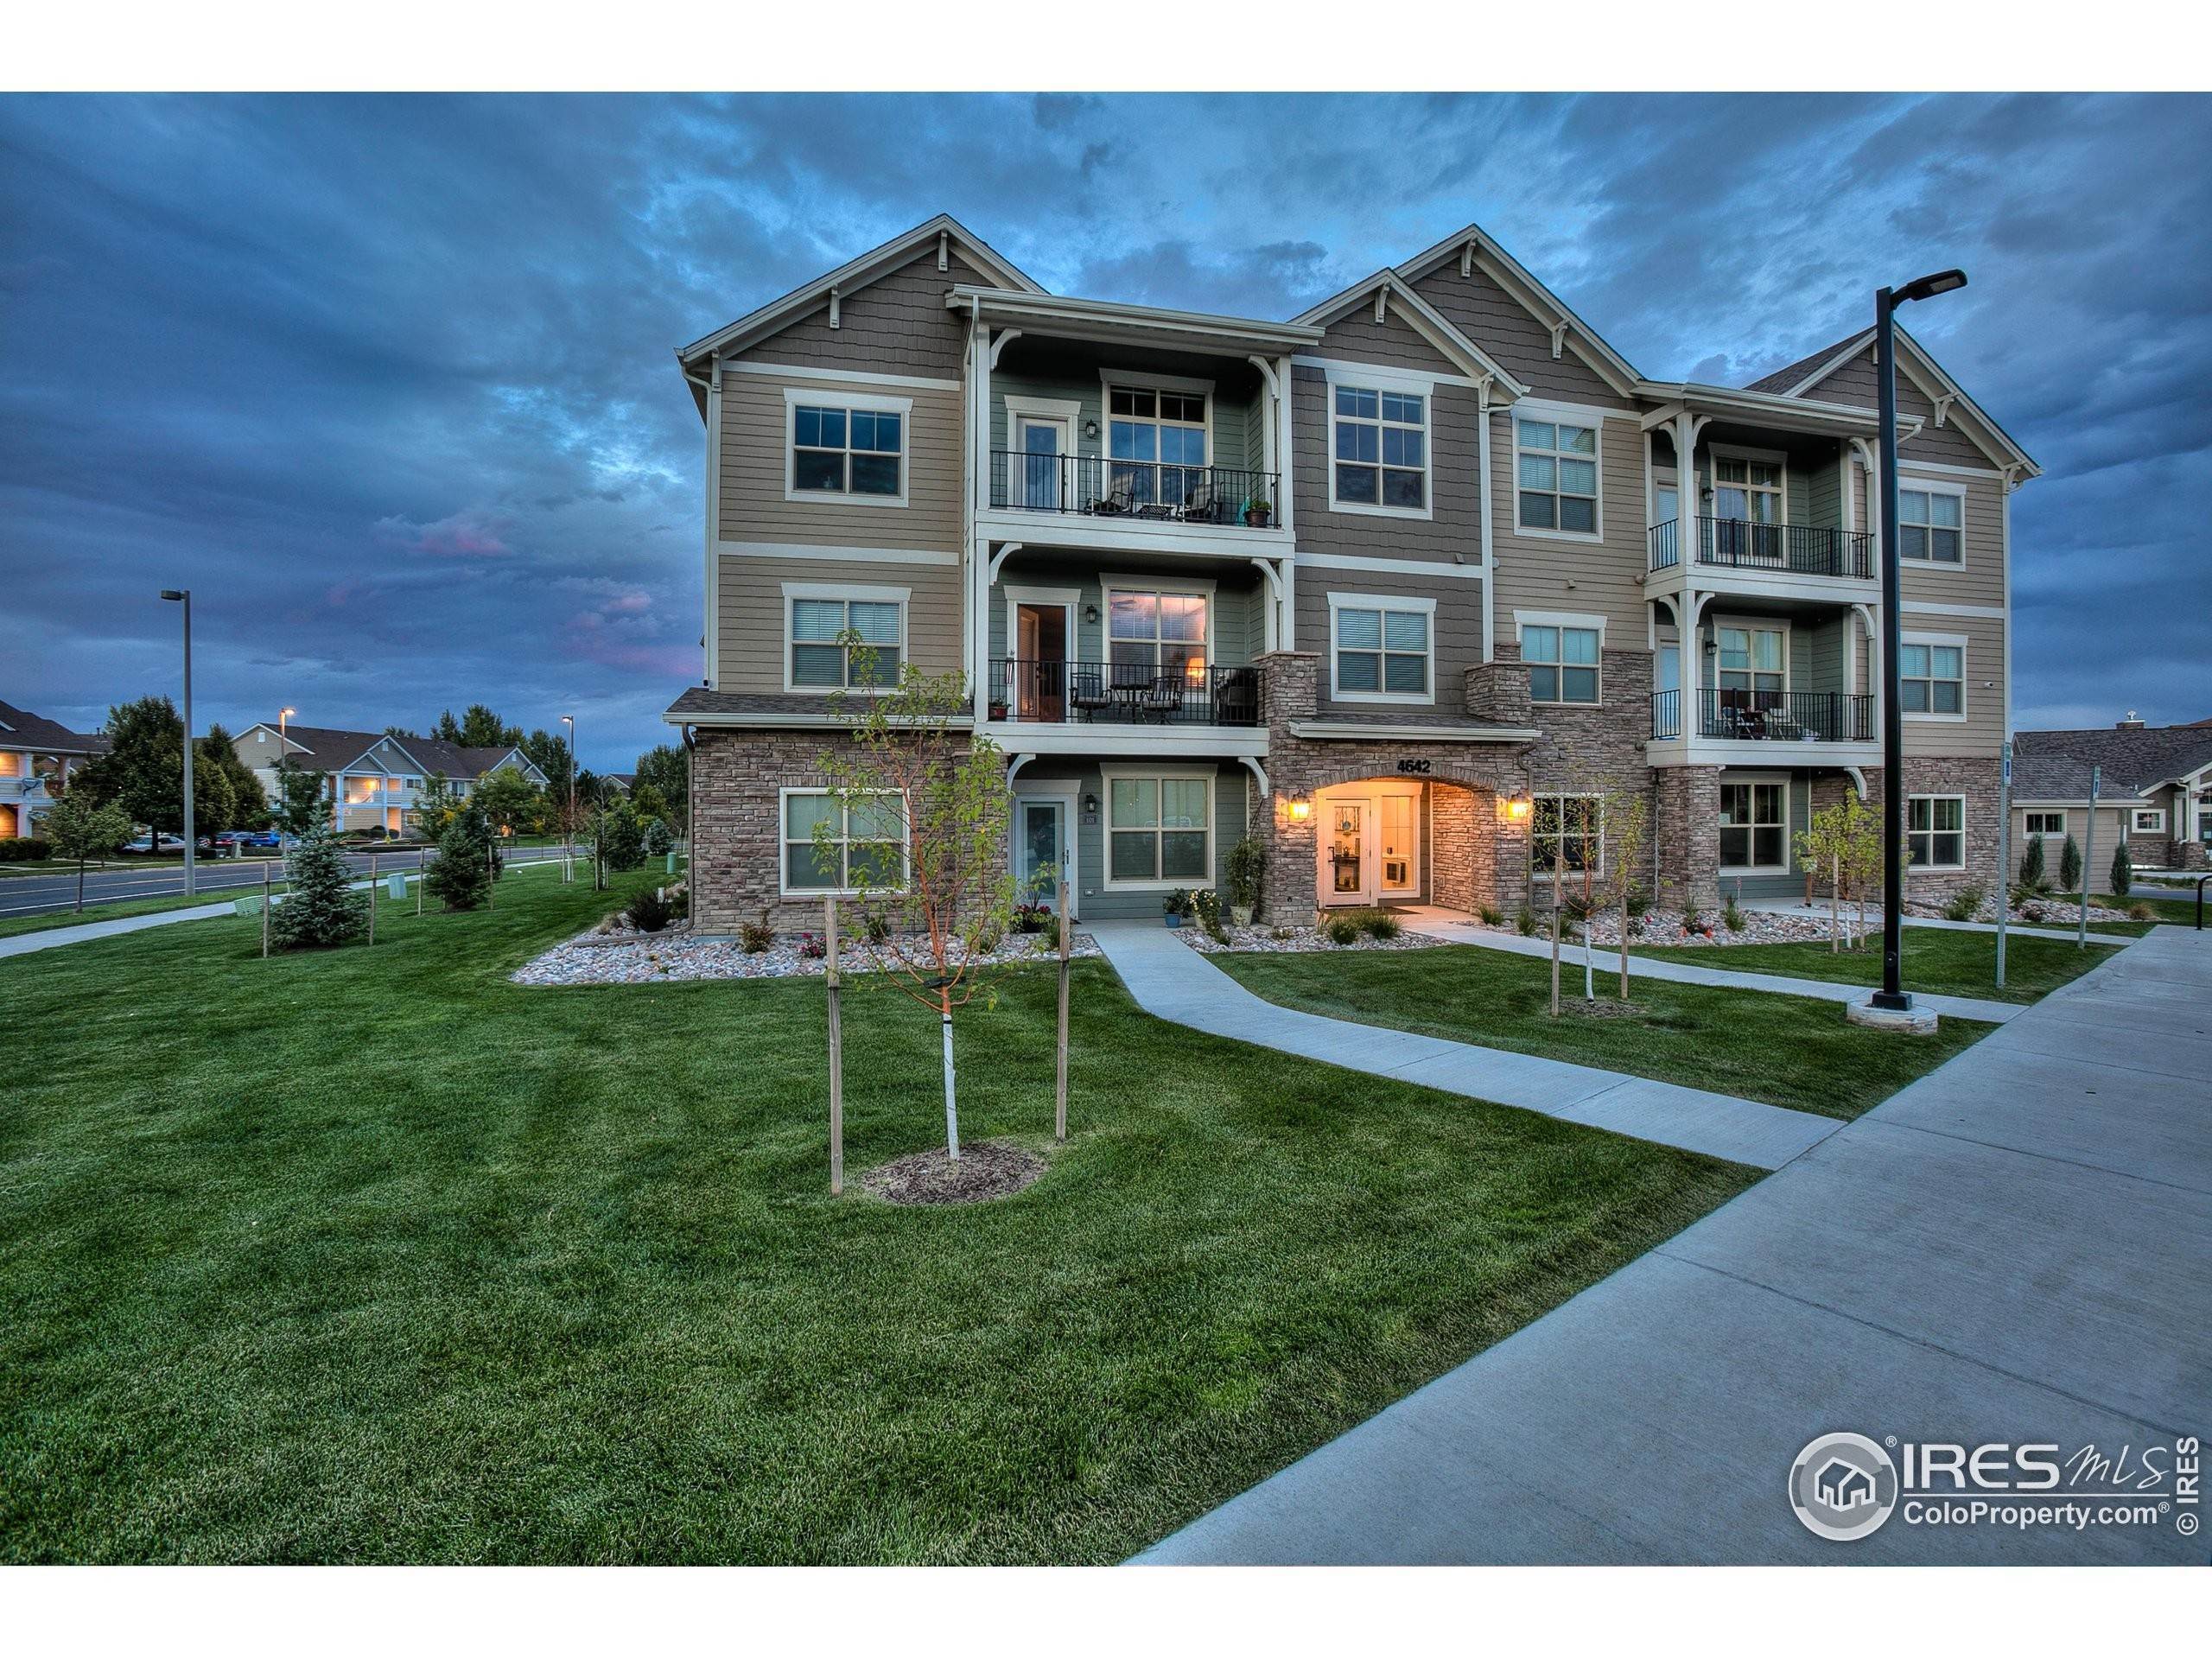 4. Single Family Homes for Active at 4622 Hahns Peak Drive 308 Loveland, Colorado 80538 United States